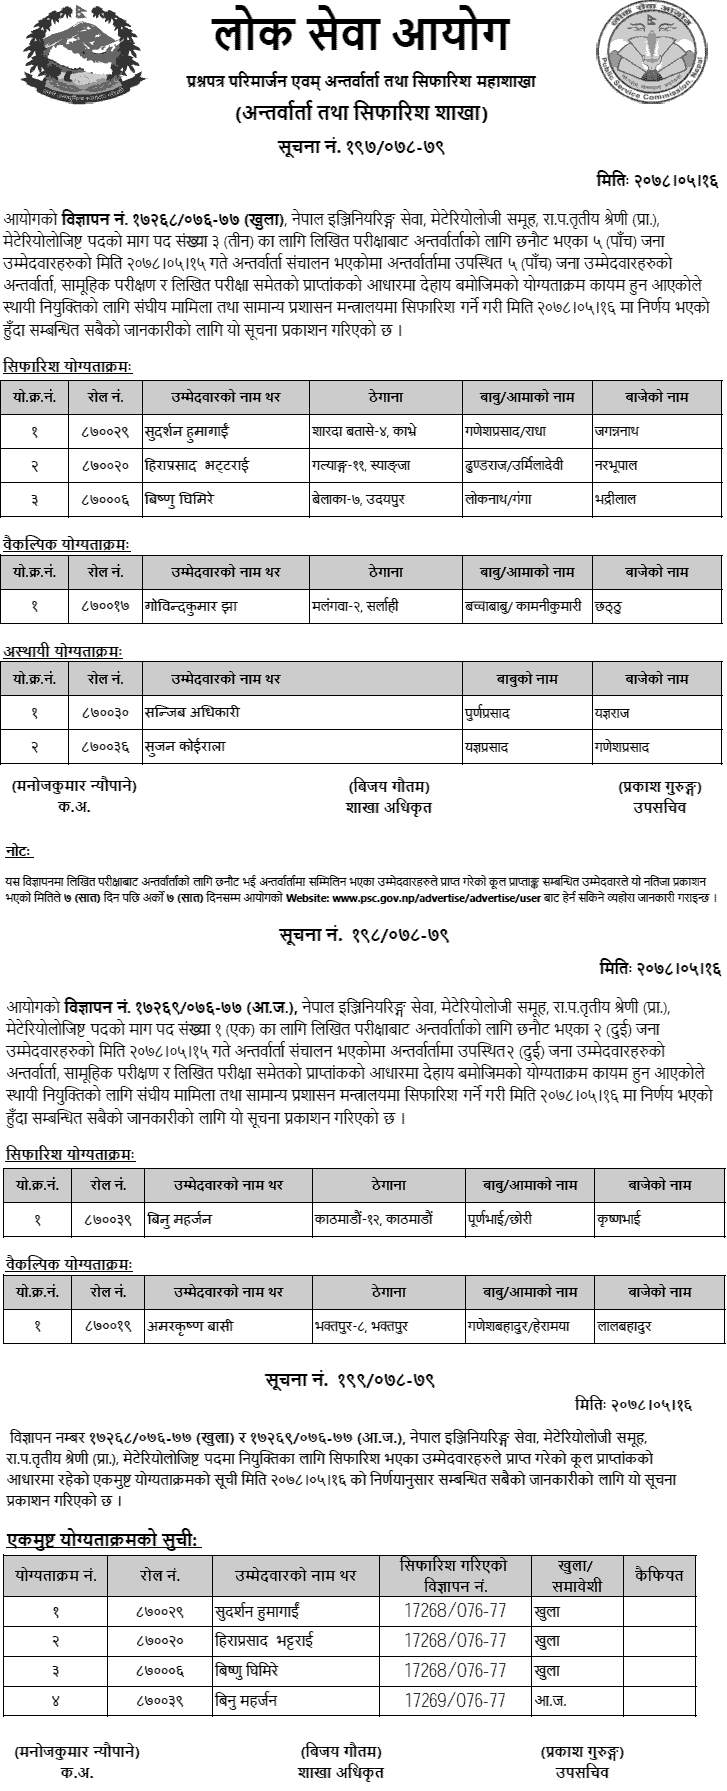 Lok Sewa Aayog Final Result and Recommendation of Meteorologist